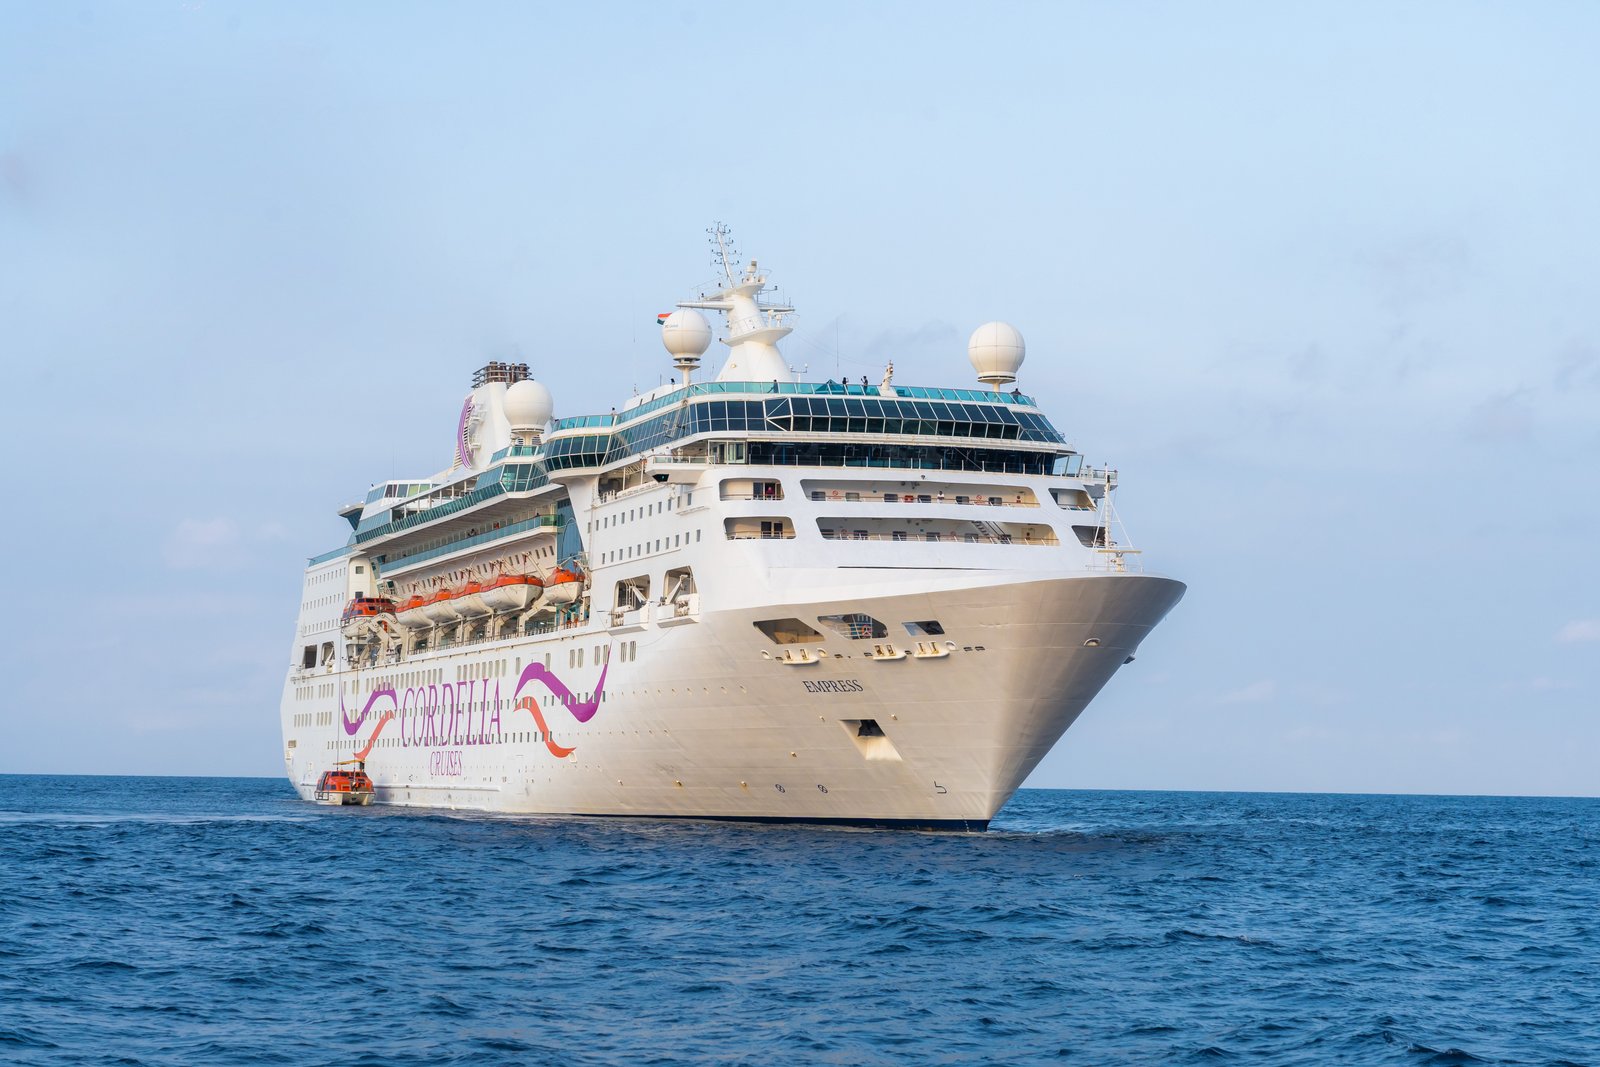 Tips & Tricks To Get The Best Out Of Your Cordelia Cruise Holidays